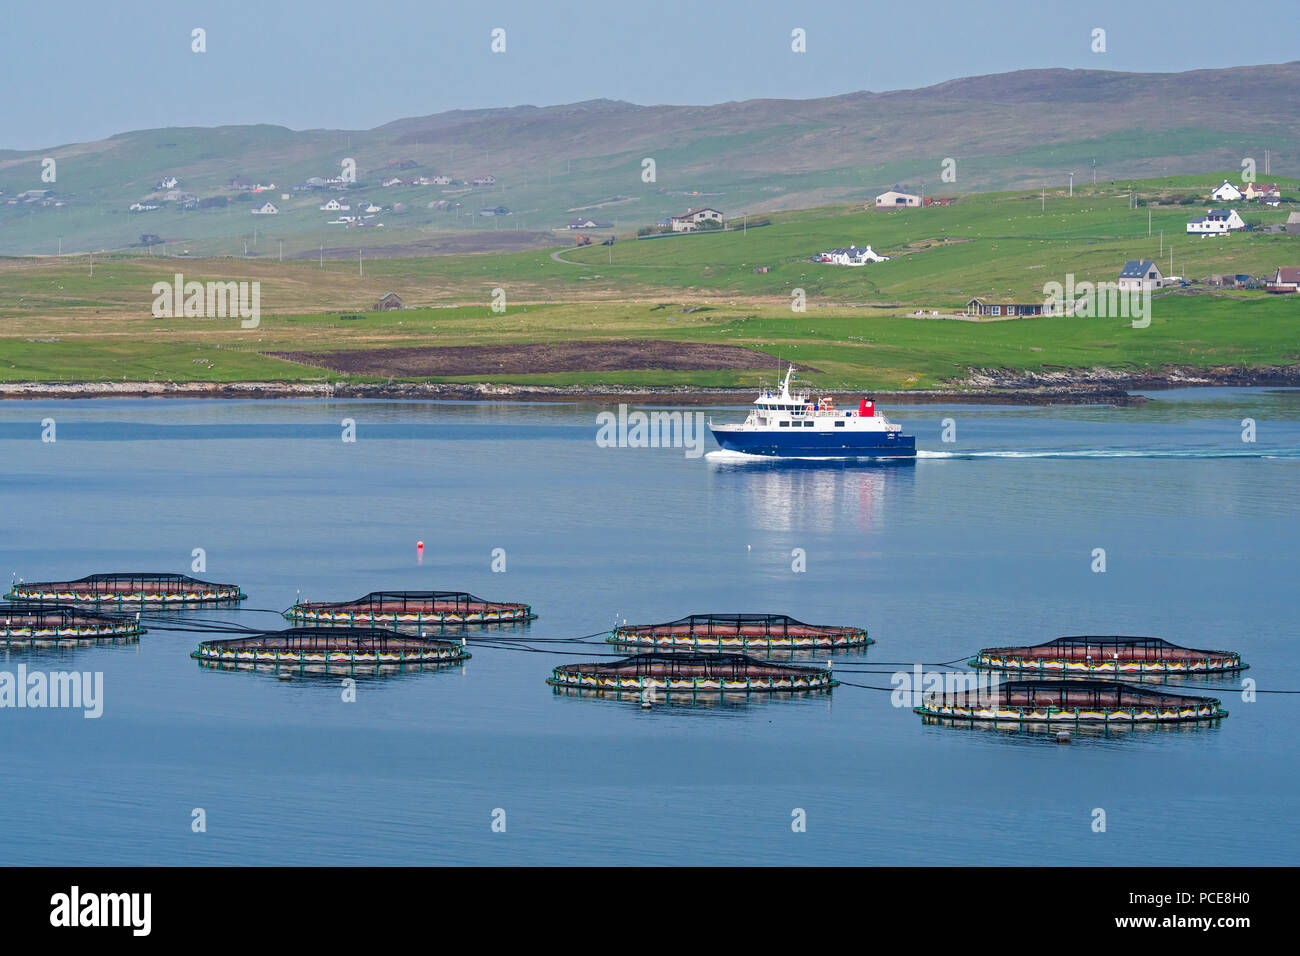 Ferry boat Linga sailing past sea cages / sea pens / fish cages from salmon farm in Laxo Voe, Vidlin on the Mainland, Shetland Islands, Scotland, UK Stock Photo